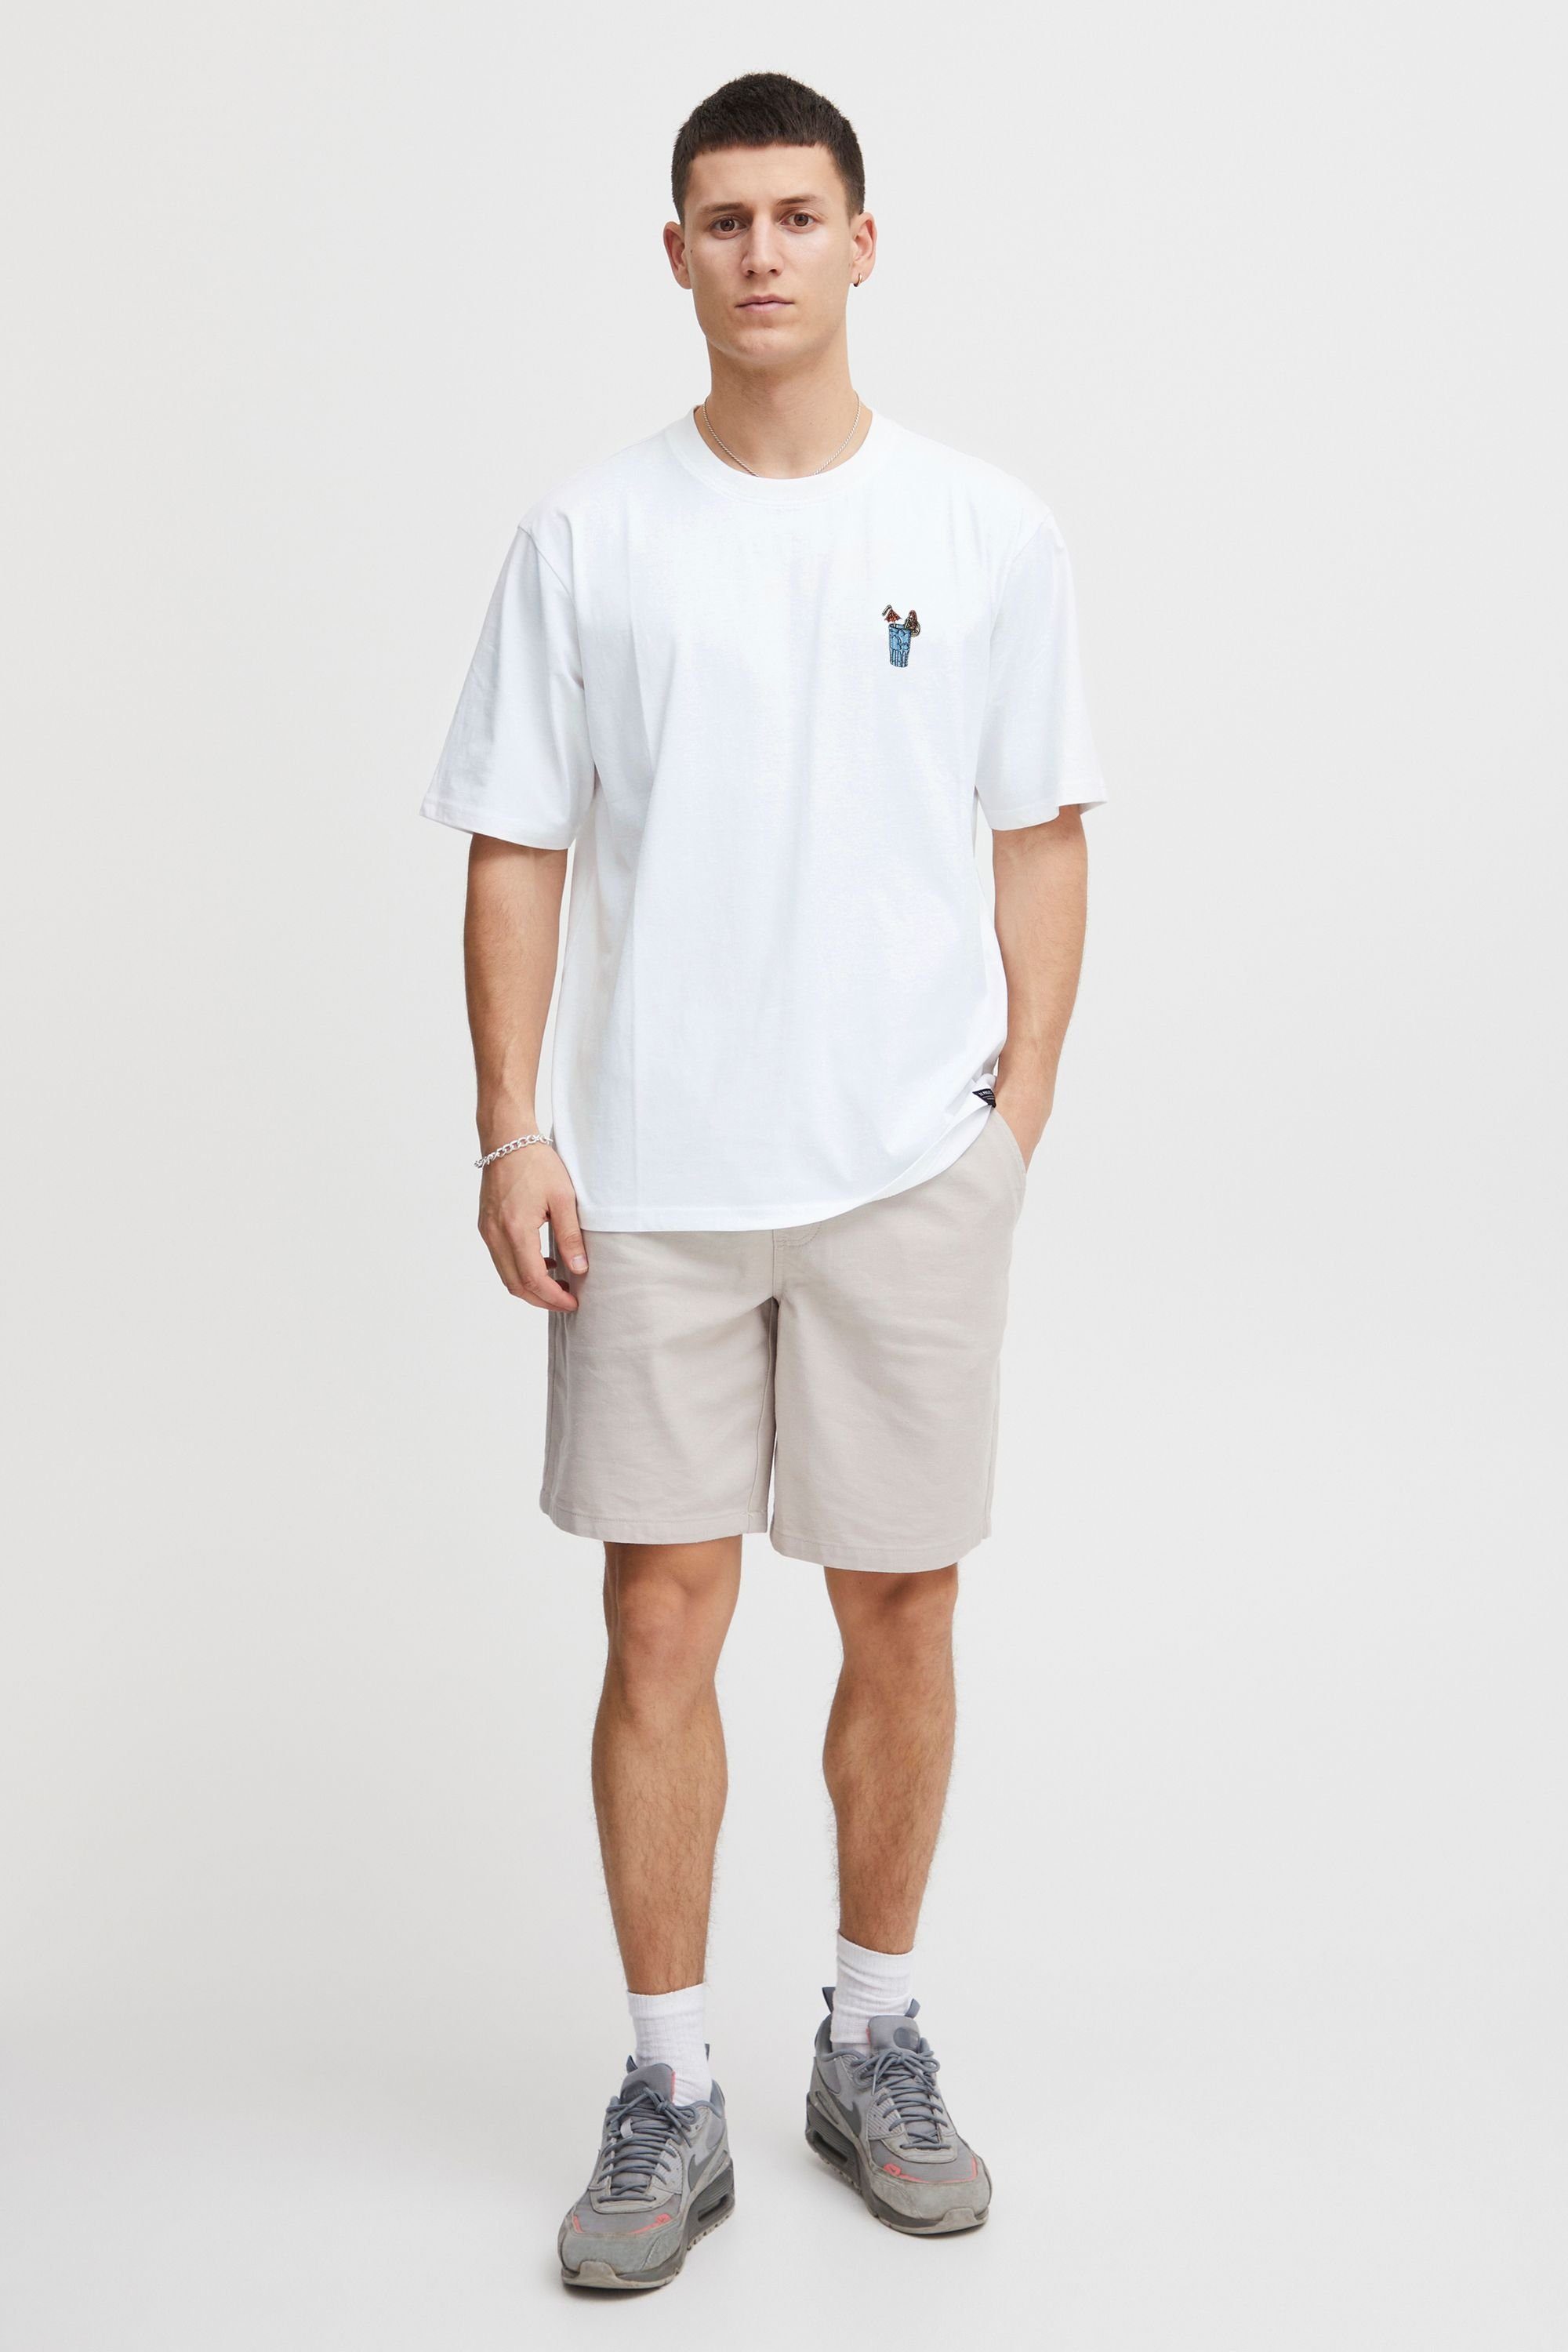 11 Project T-Shirt PRJust Project 11 White